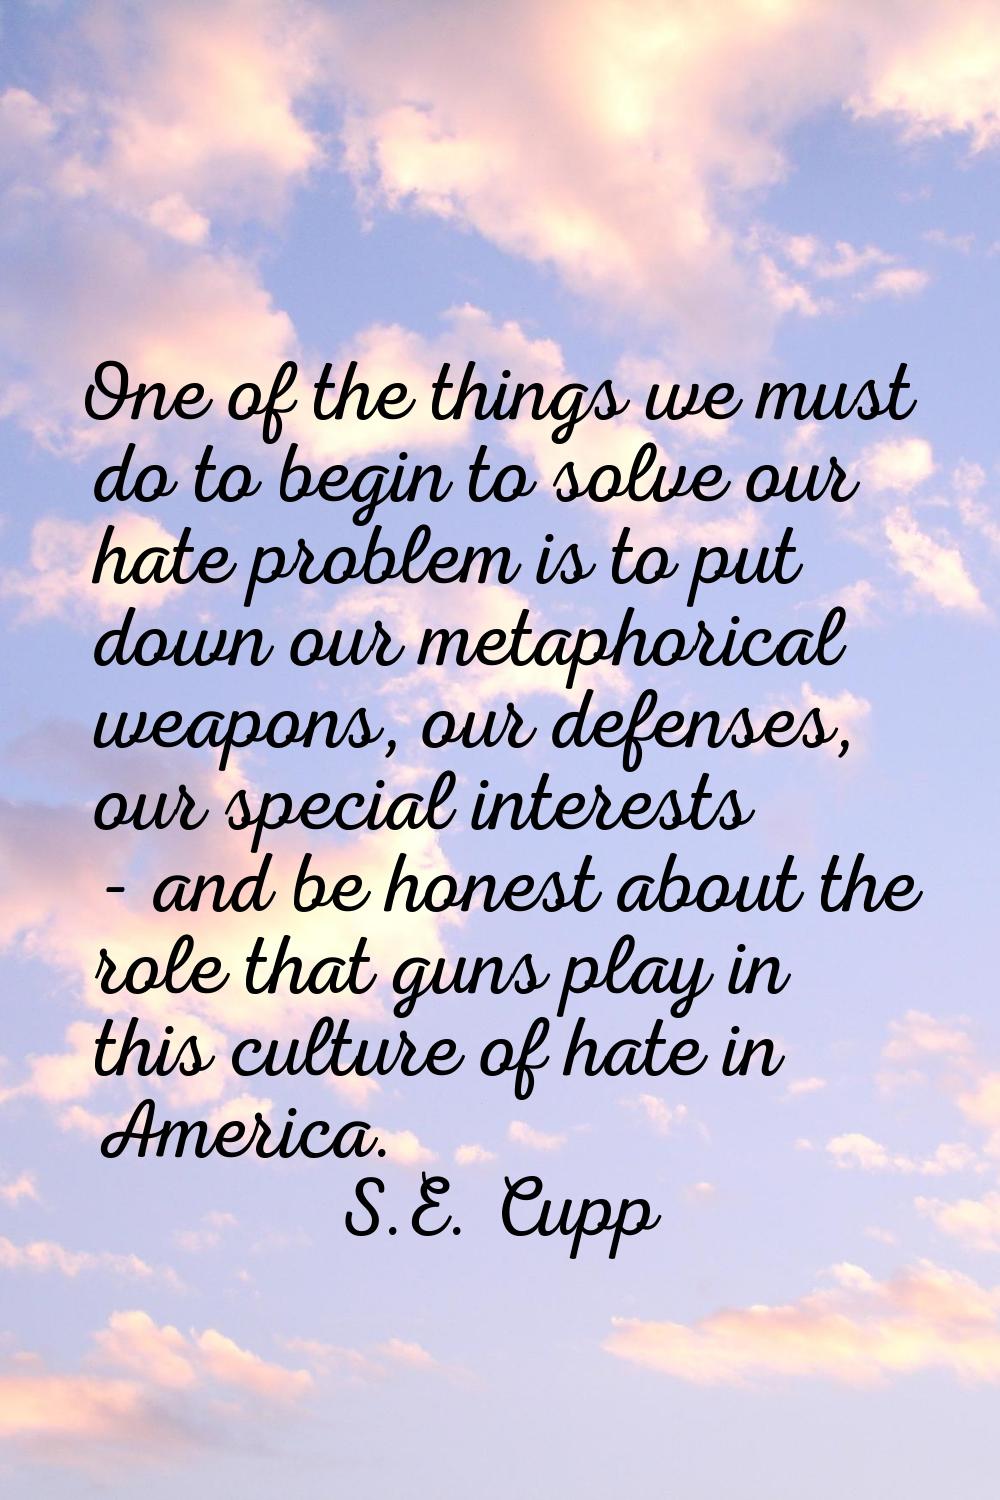 One of the things we must do to begin to solve our hate problem is to put down our metaphorical wea